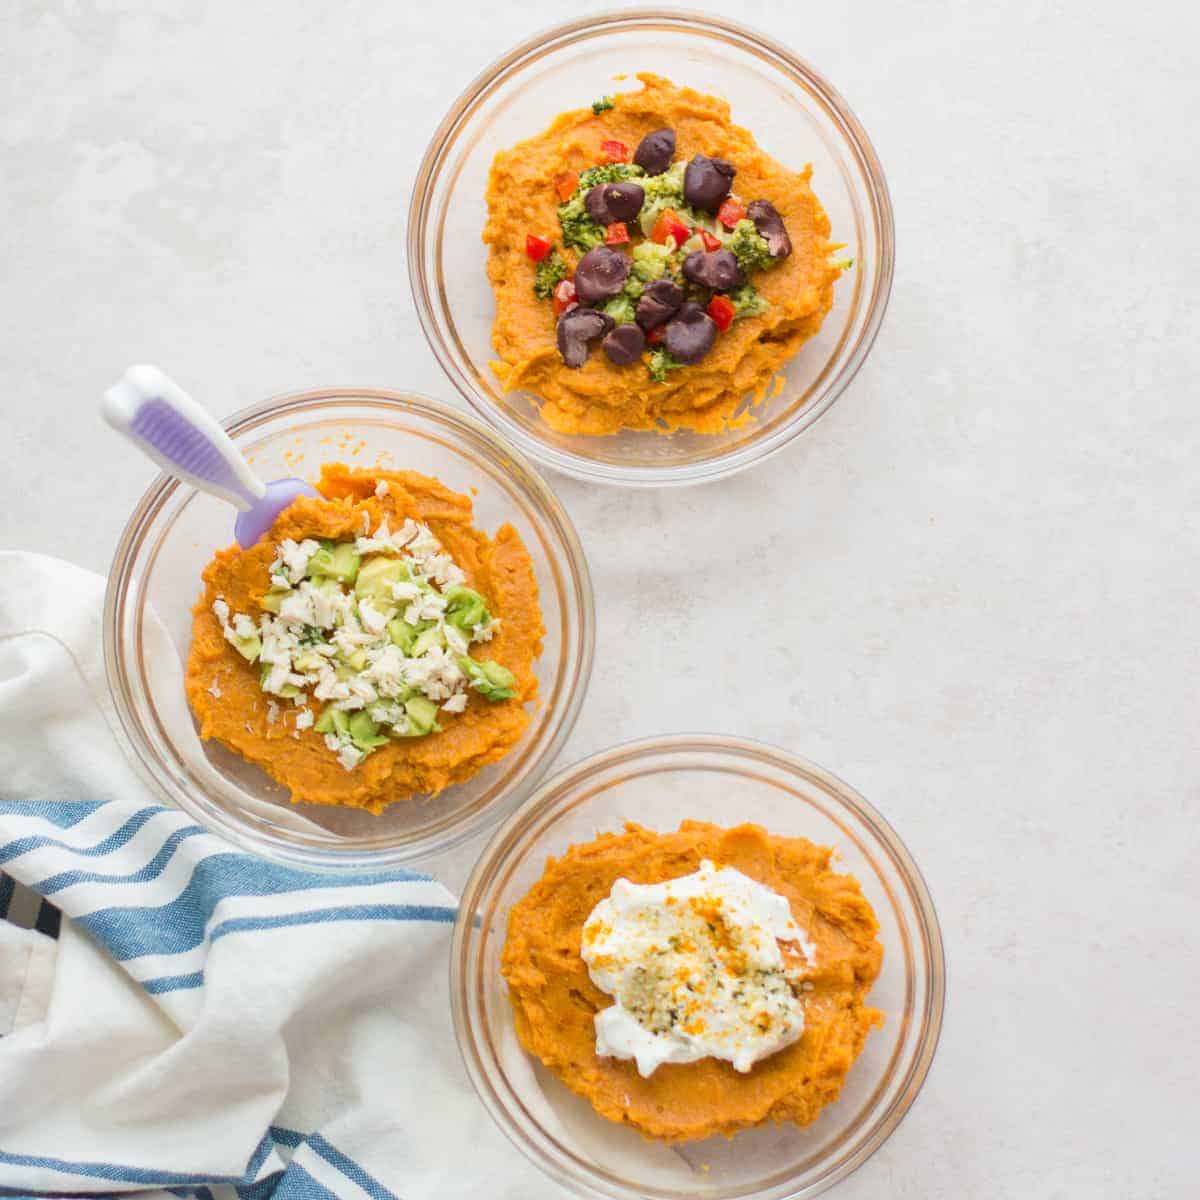 three different versions of mashed sweet potatoes in separate glass bowls. One with black beans and broccoli, second one with chicken and avocado, and third one with yogurt, hemp seeds, and turmeric